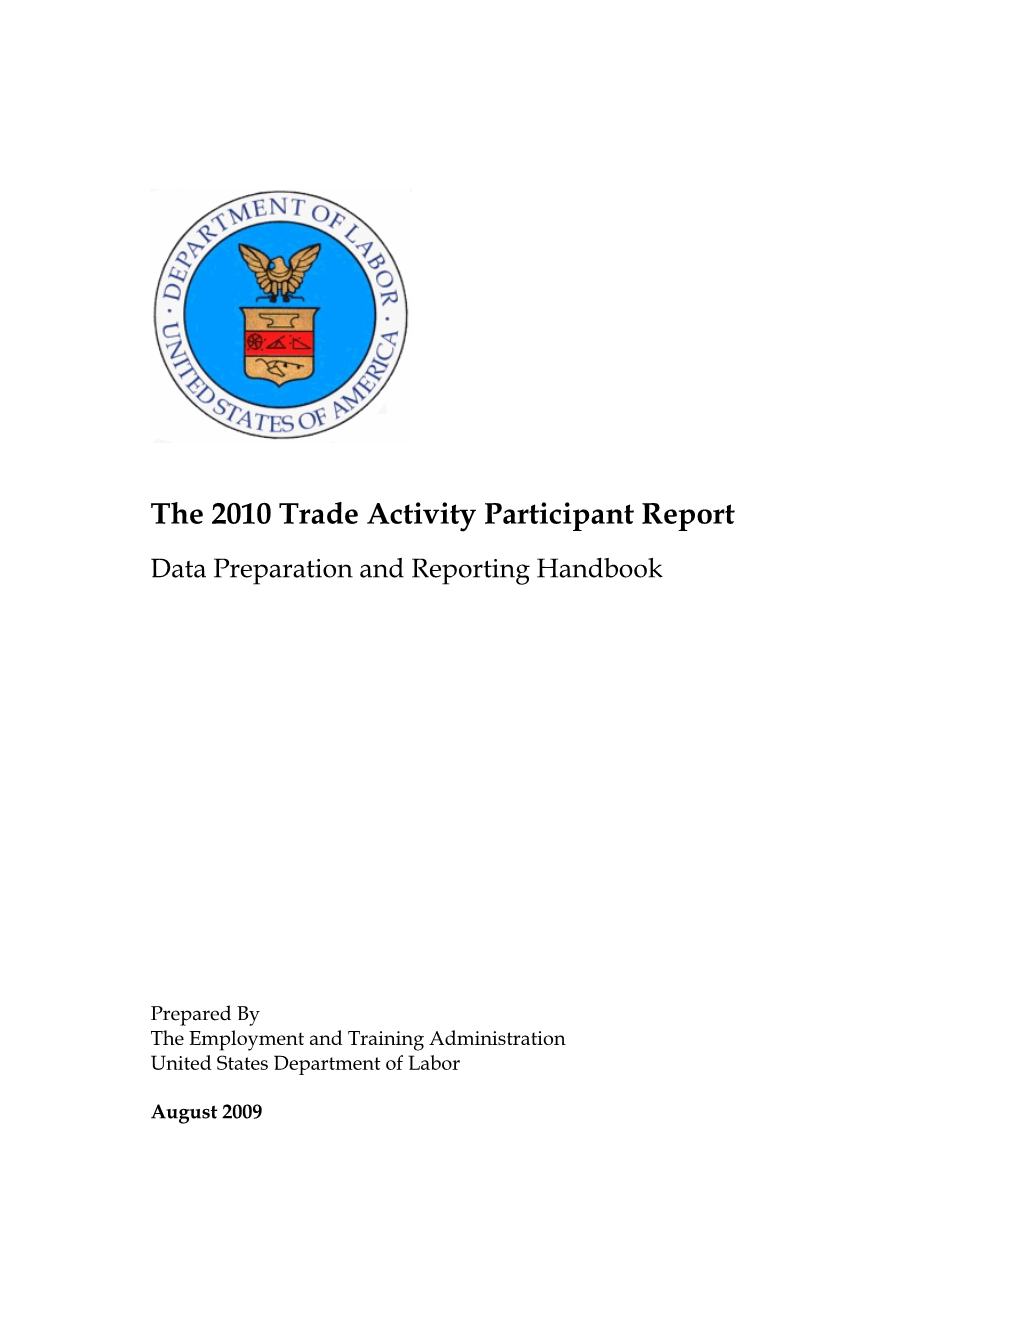 Trade Act Participant Report